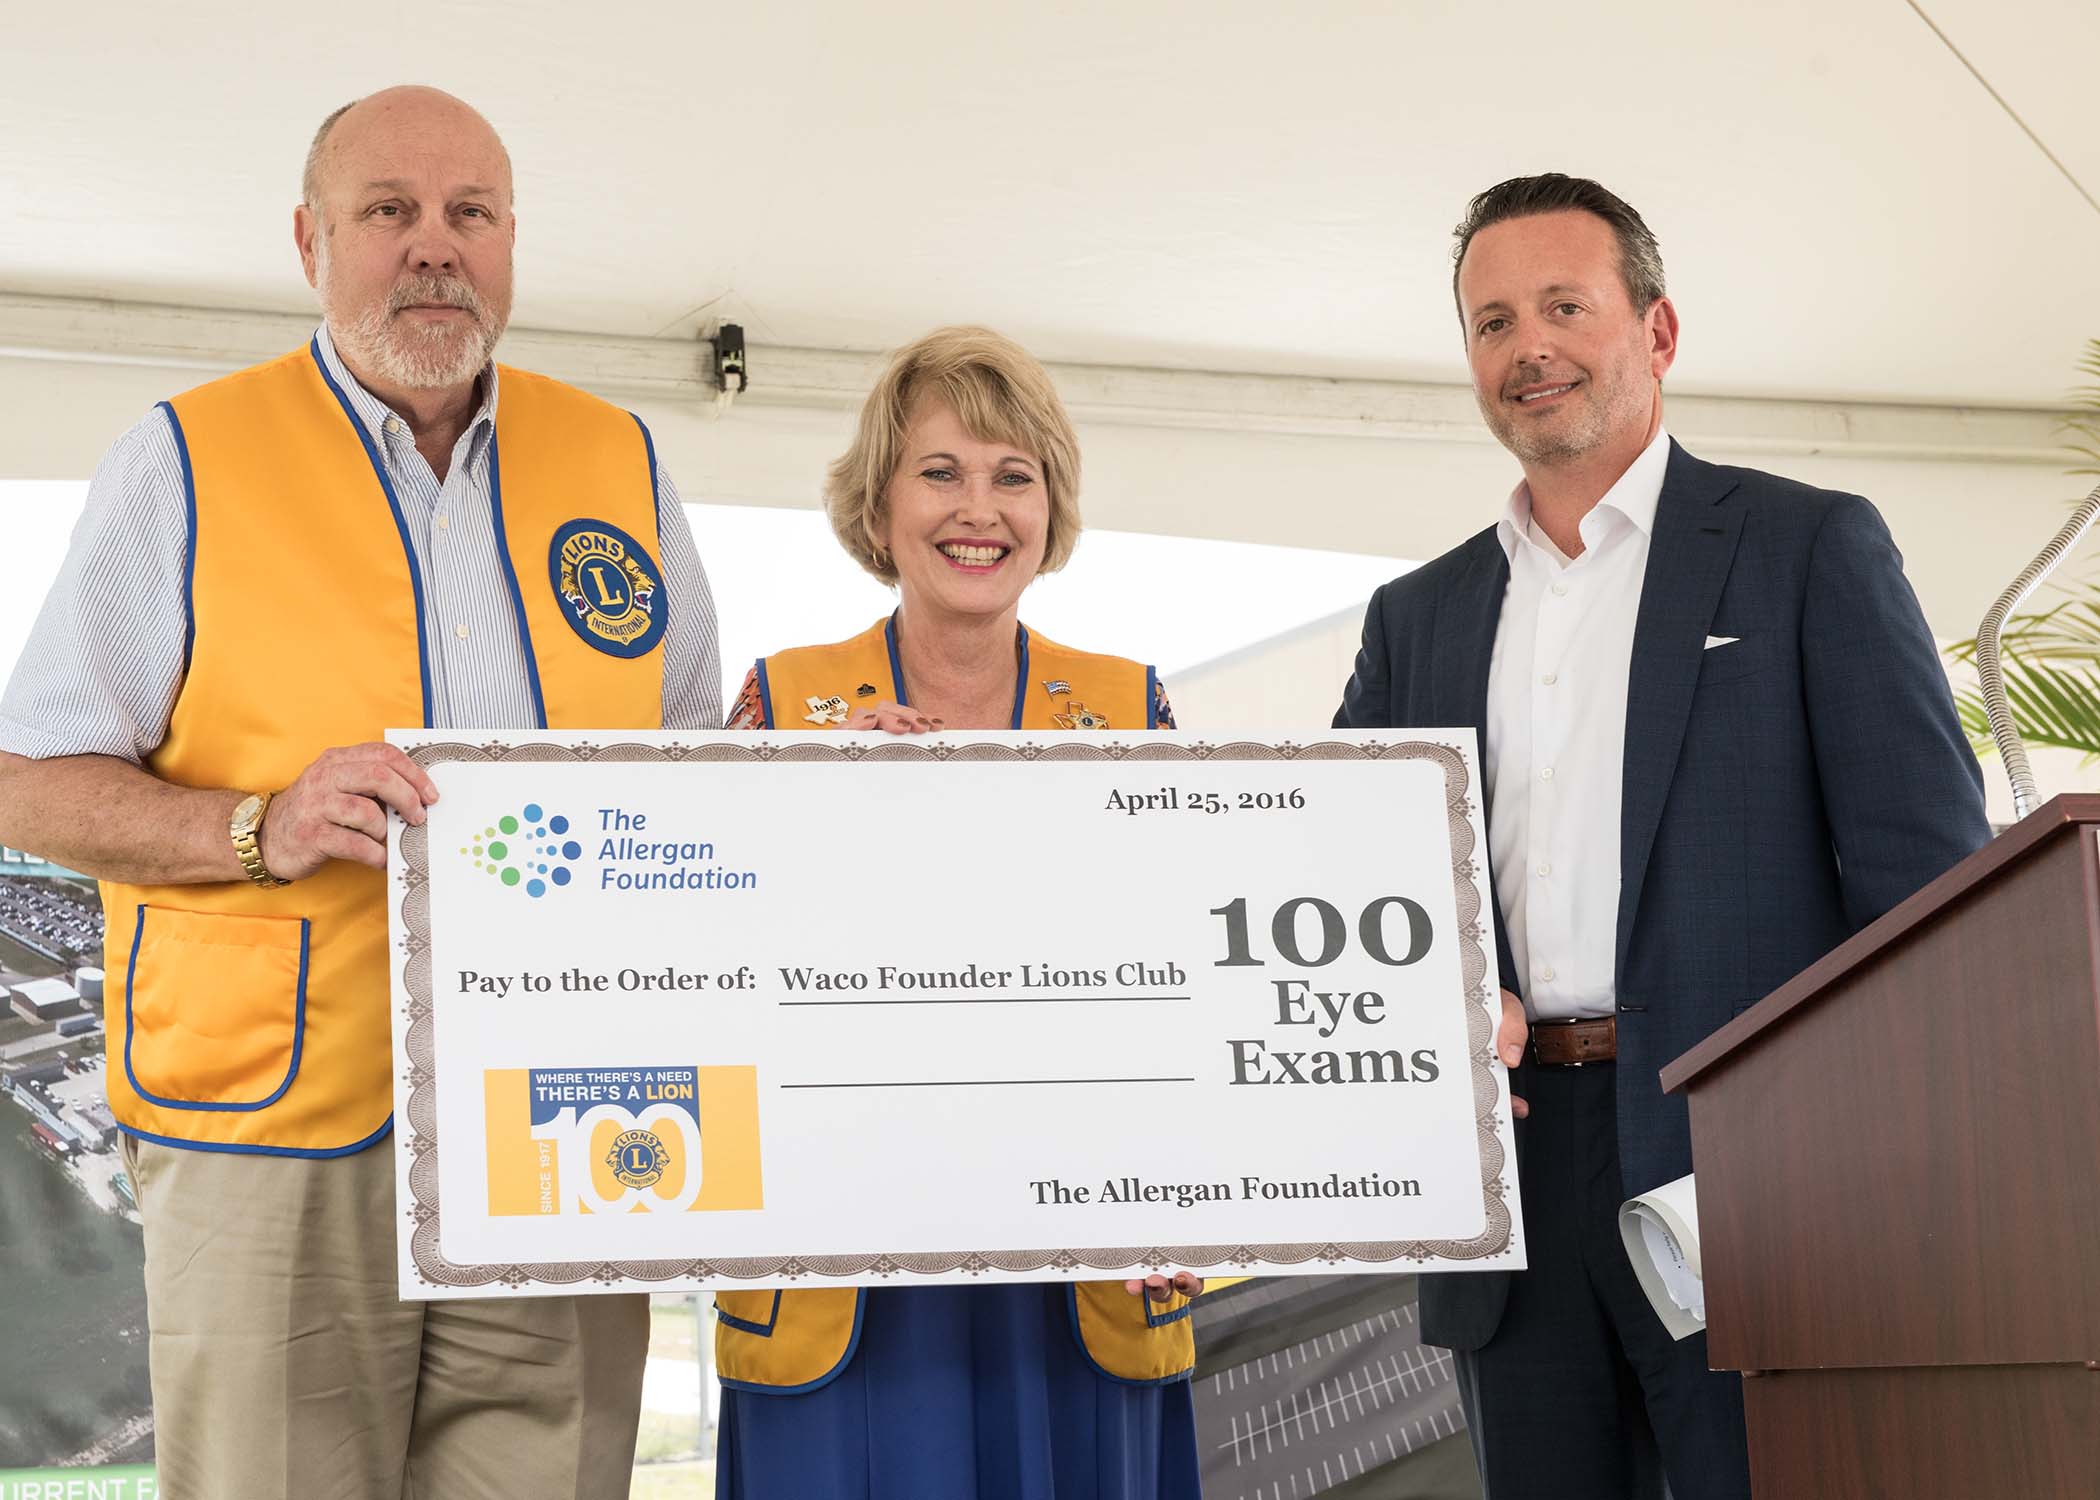 Allergan President & CEO Brent Saunders presents a donation of 100 eye exams to Waco Lions Club President Buck Rogers and Past President and Vision Screening Chair Louise Ann Powell. The donation, by the Allergan Foundation, is in recognition of Lions Club International’s 100 year anniversary The donation will allow the Waco Founders Lions Club to initiate a pilot project coordinating with local eye care professionals to support eye exams for those in need in the Waco community.